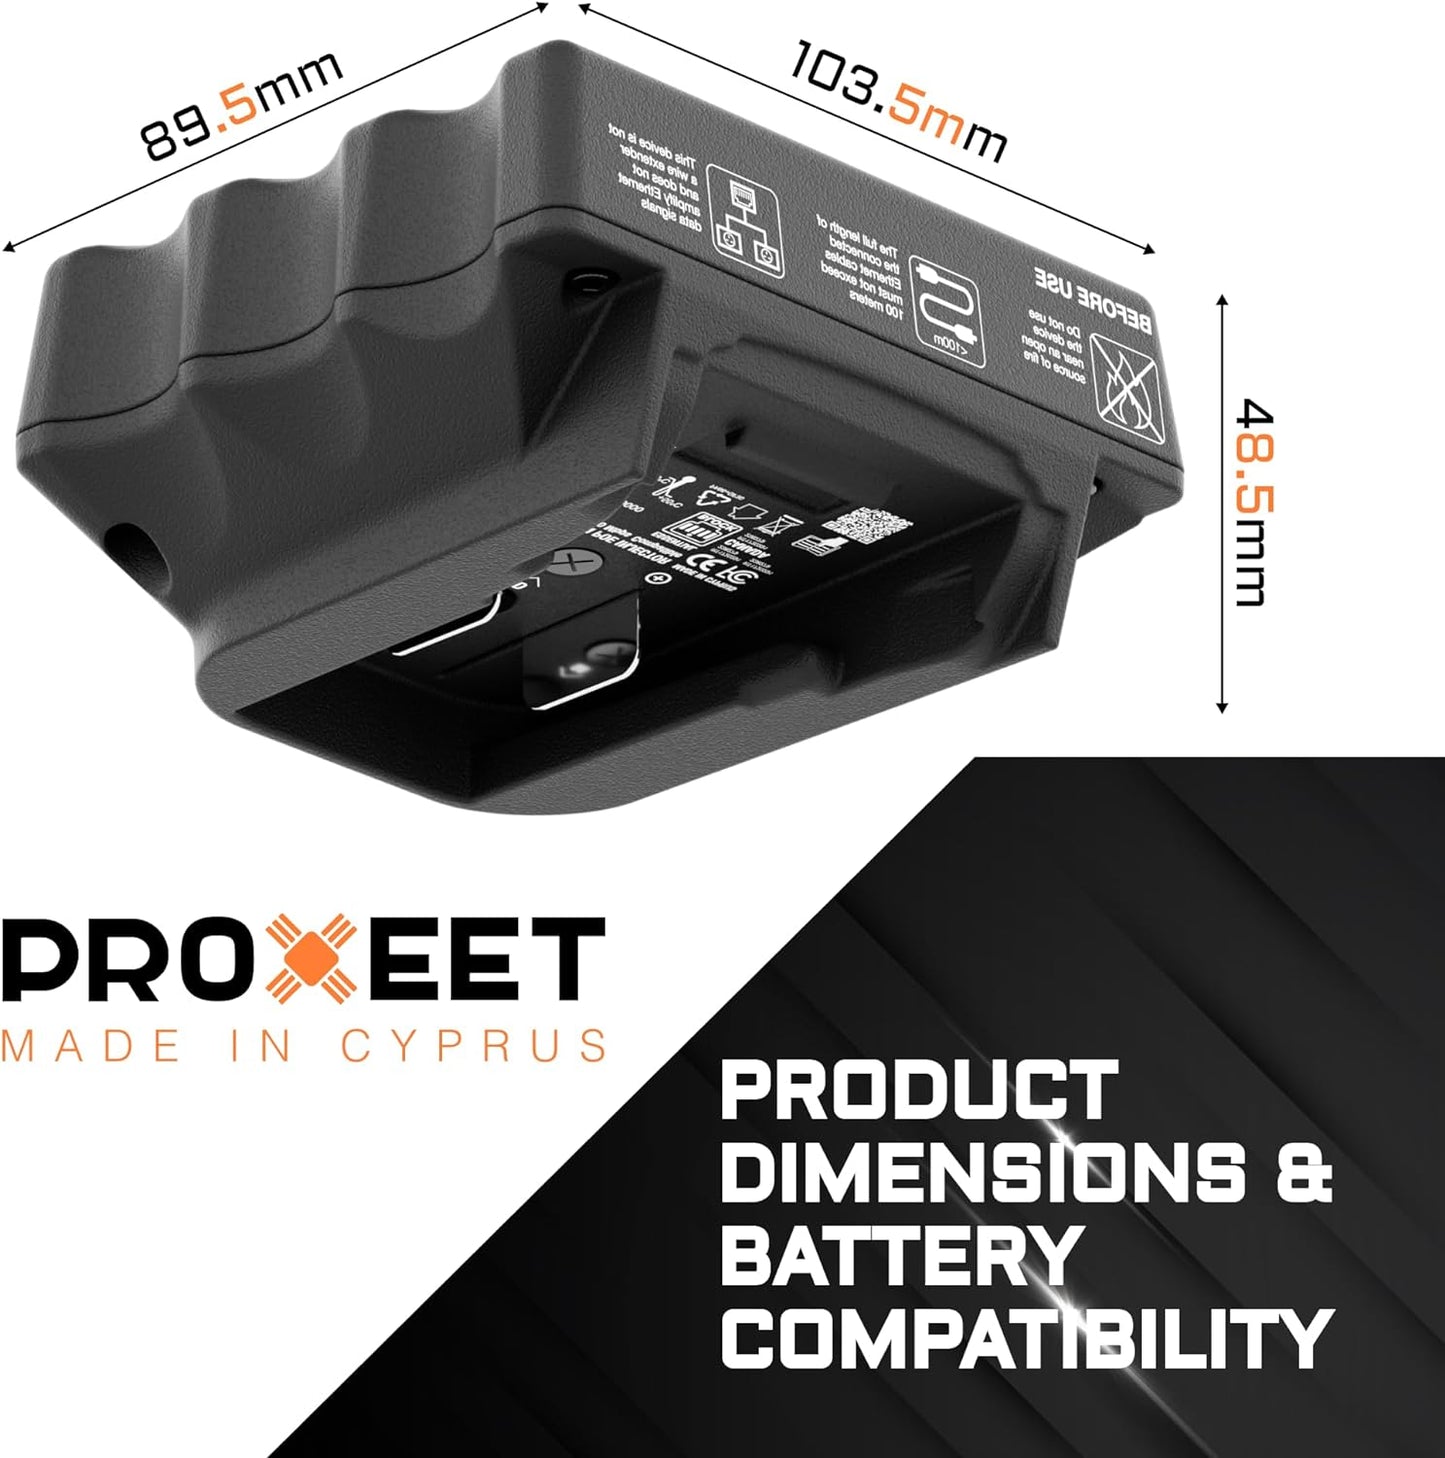 PROXEET ET-2C Portable Combo PoE Injector - Product Dimensions